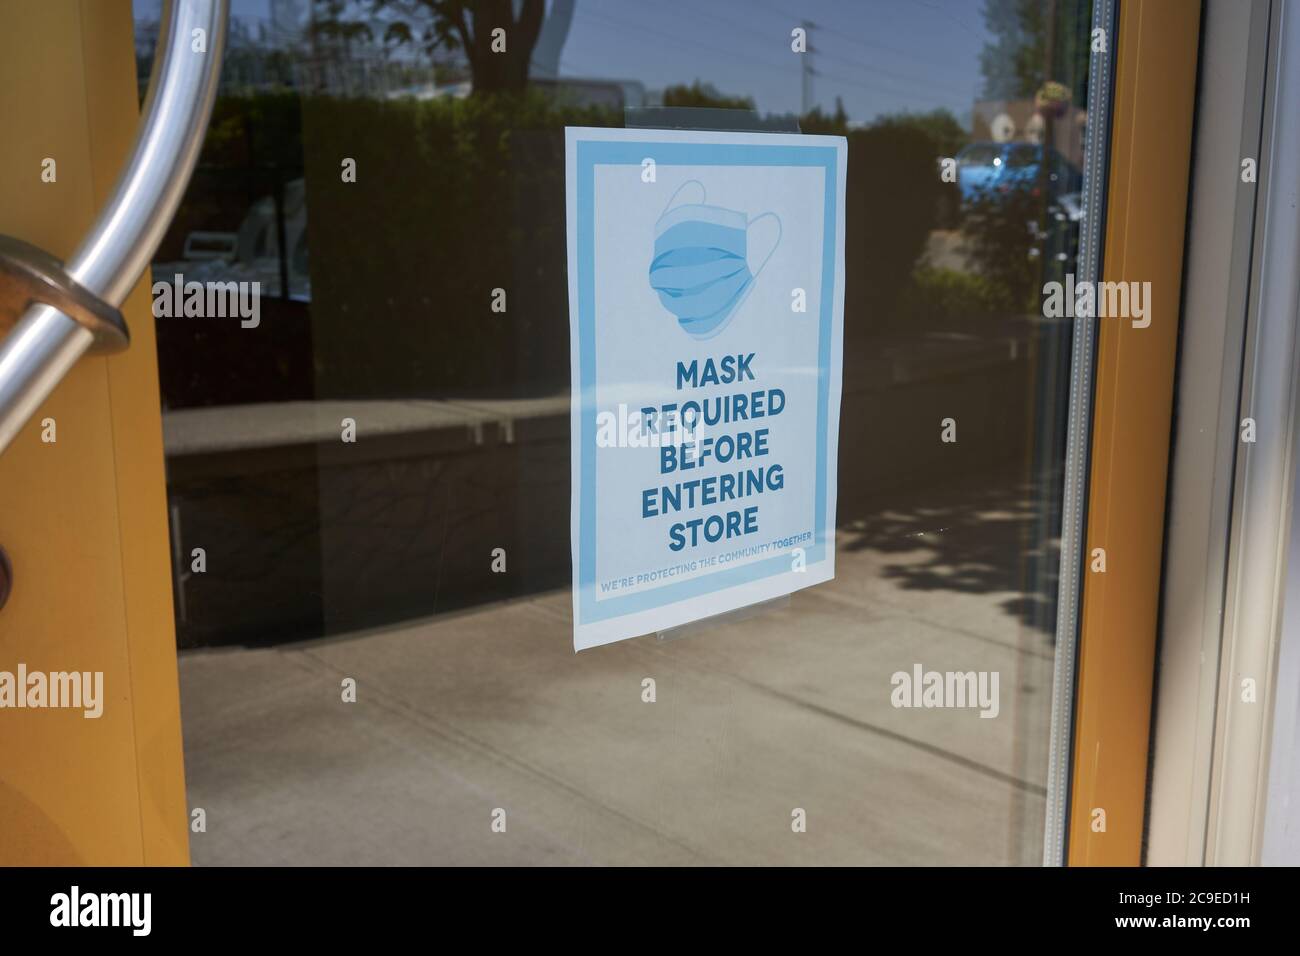 Mandatory mask policy signage at the entrance to a retail store during the coronavirus pandemic. Stock Photo